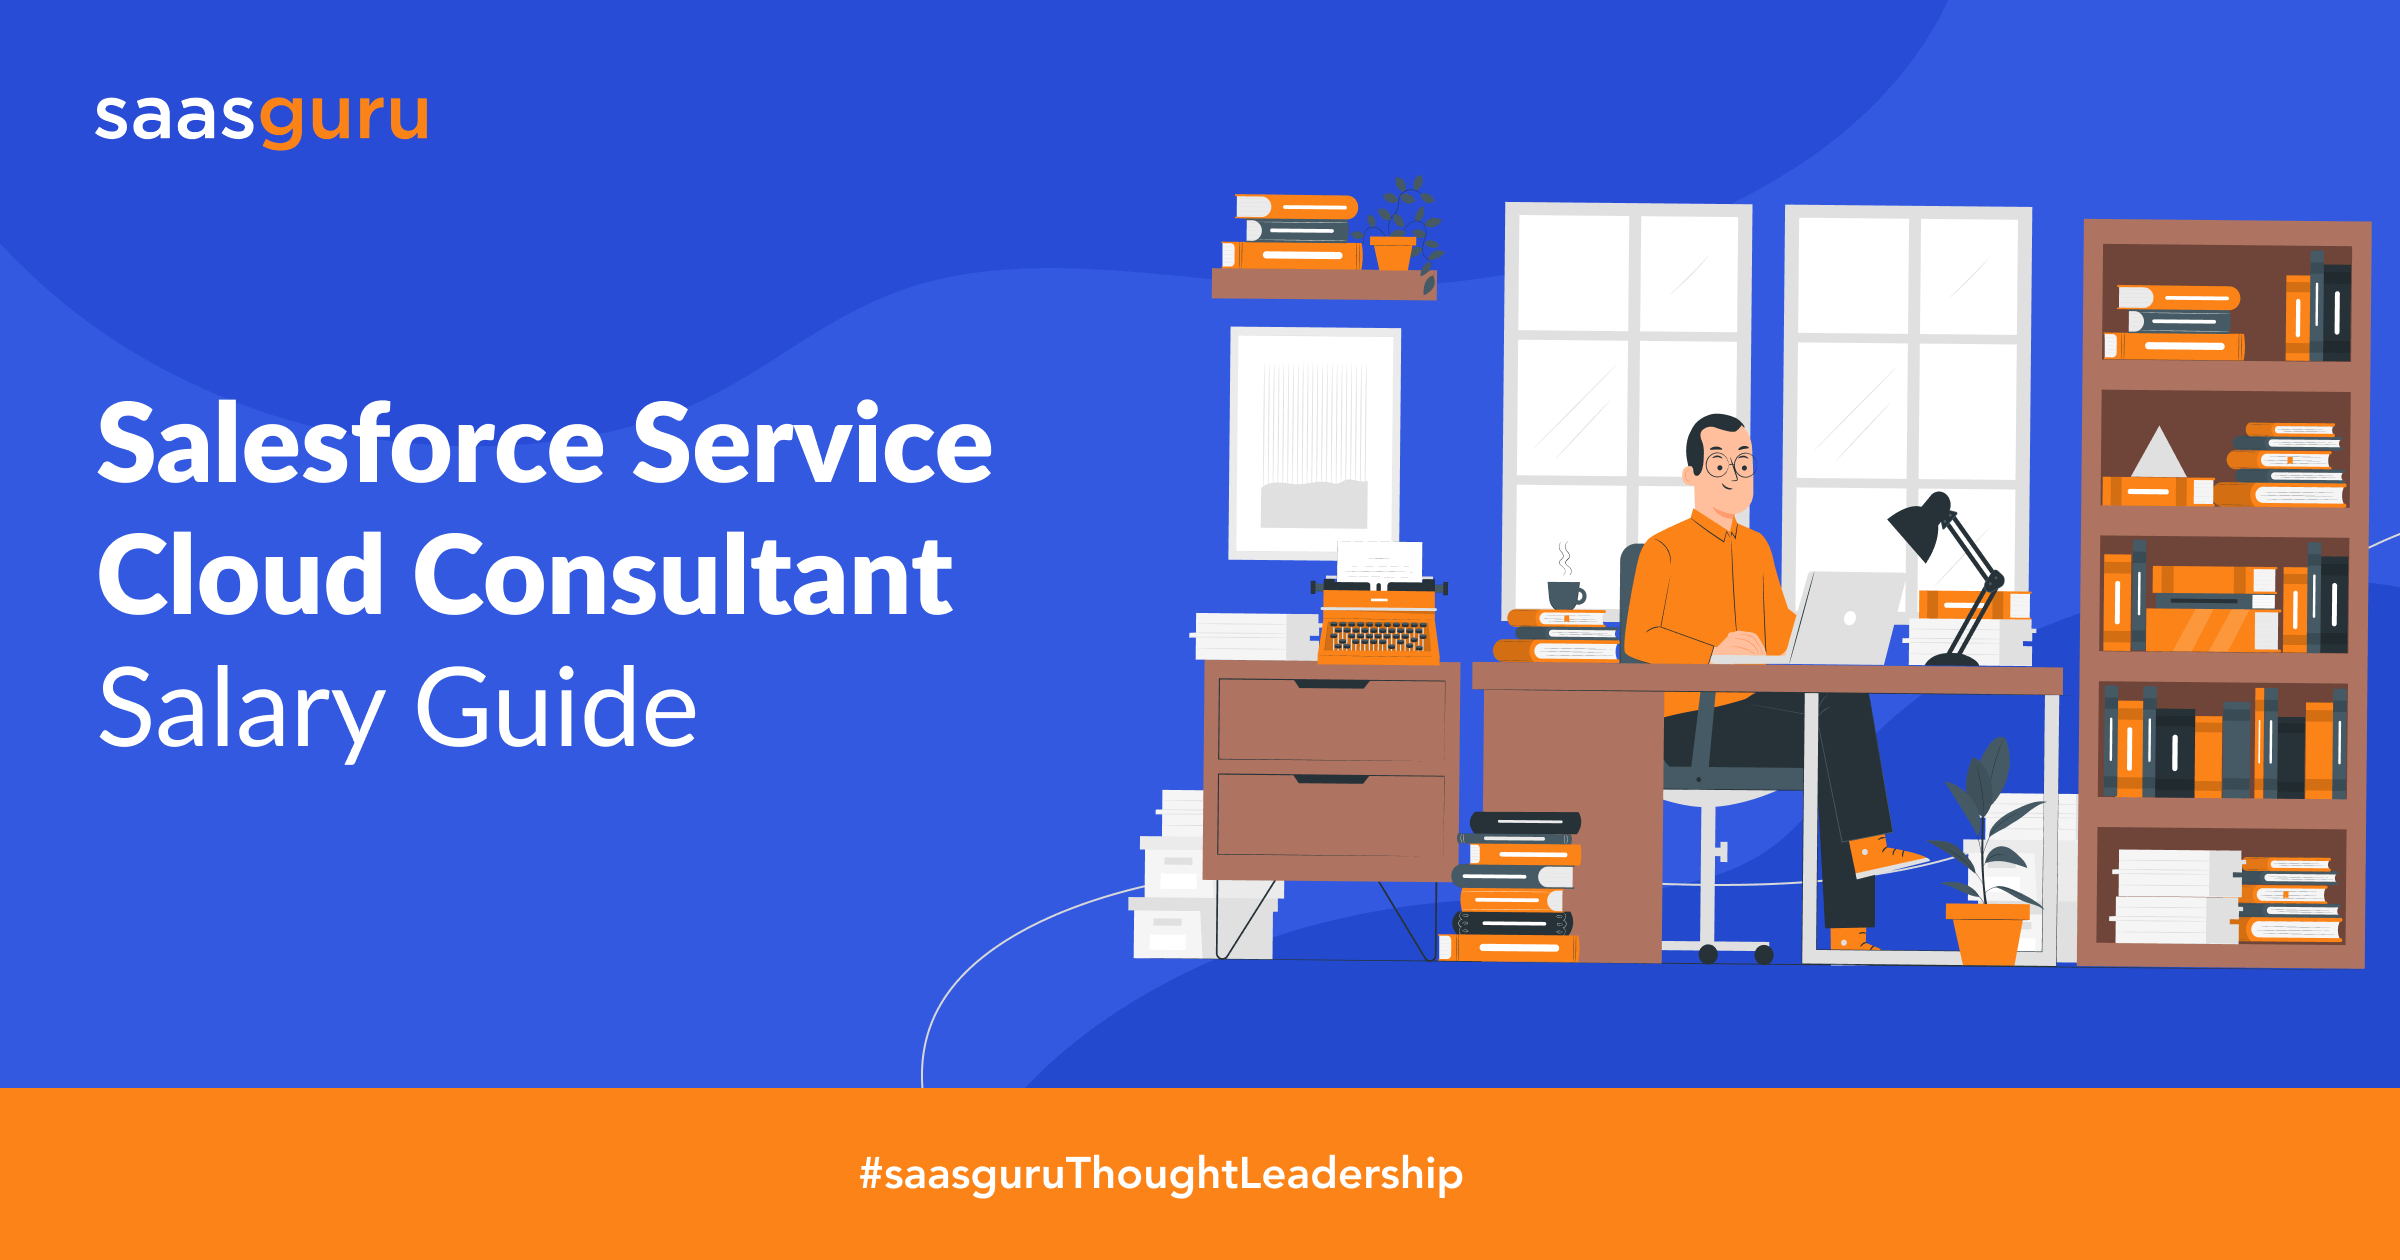 Salesforce Service Cloud Consultant Salary Guide